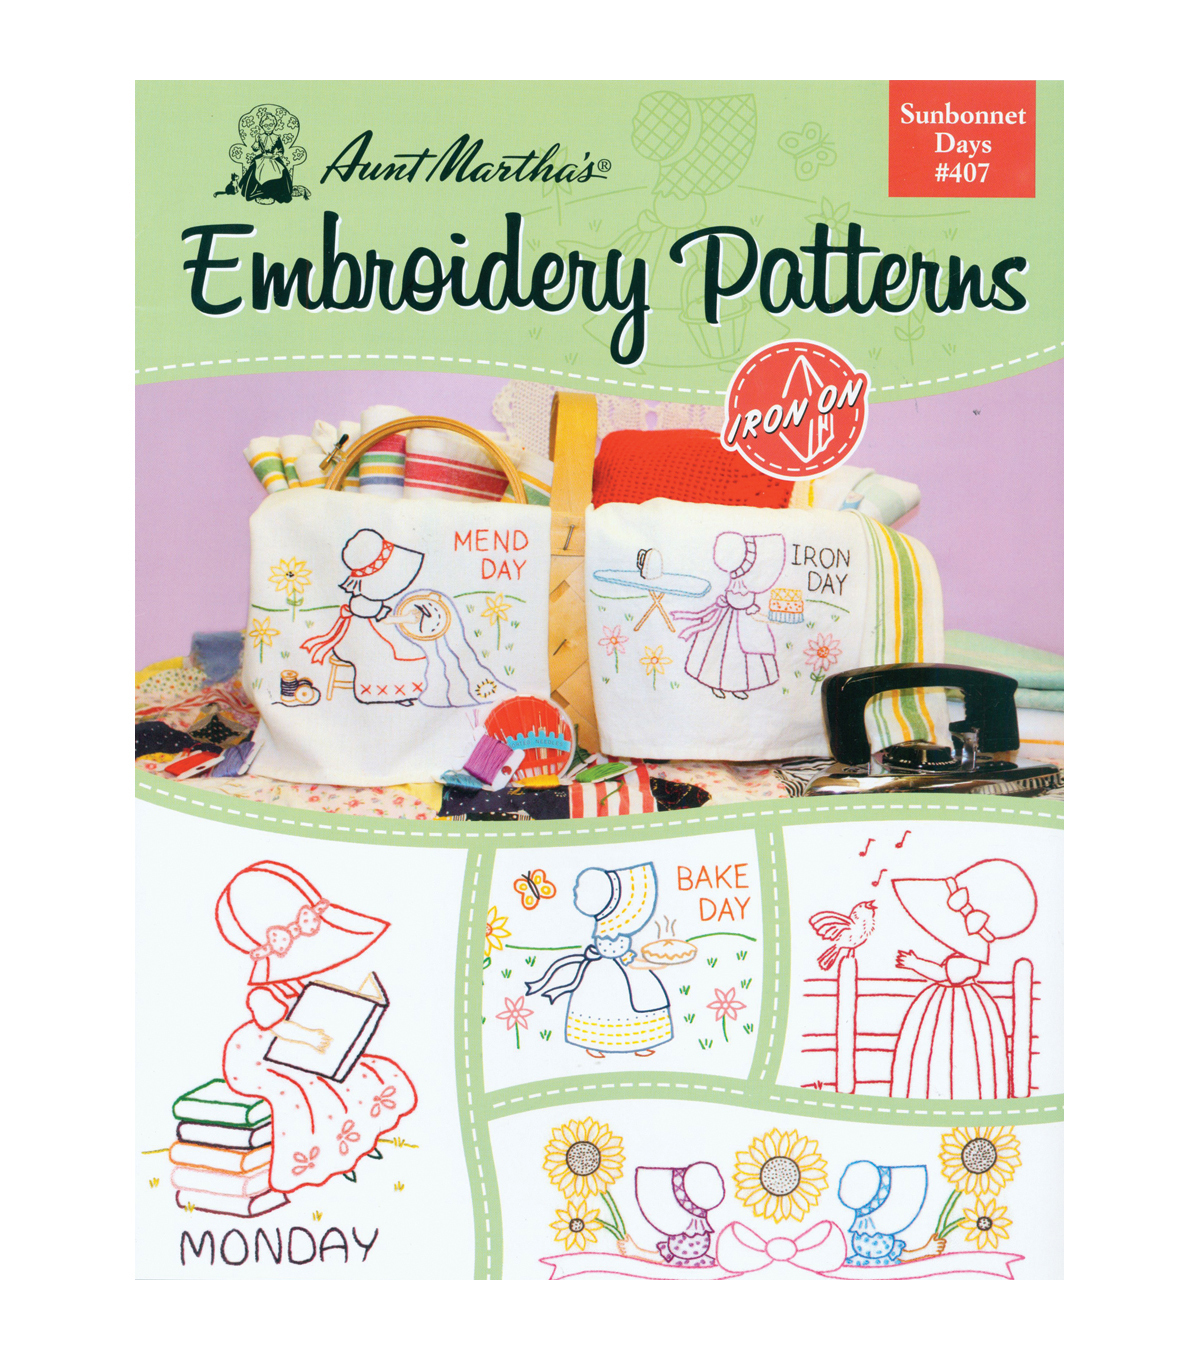 Colonial Embroidery Patterns Aunt Marthas Colonial Patterns Iron On Transfer Books Sunbonnet Days